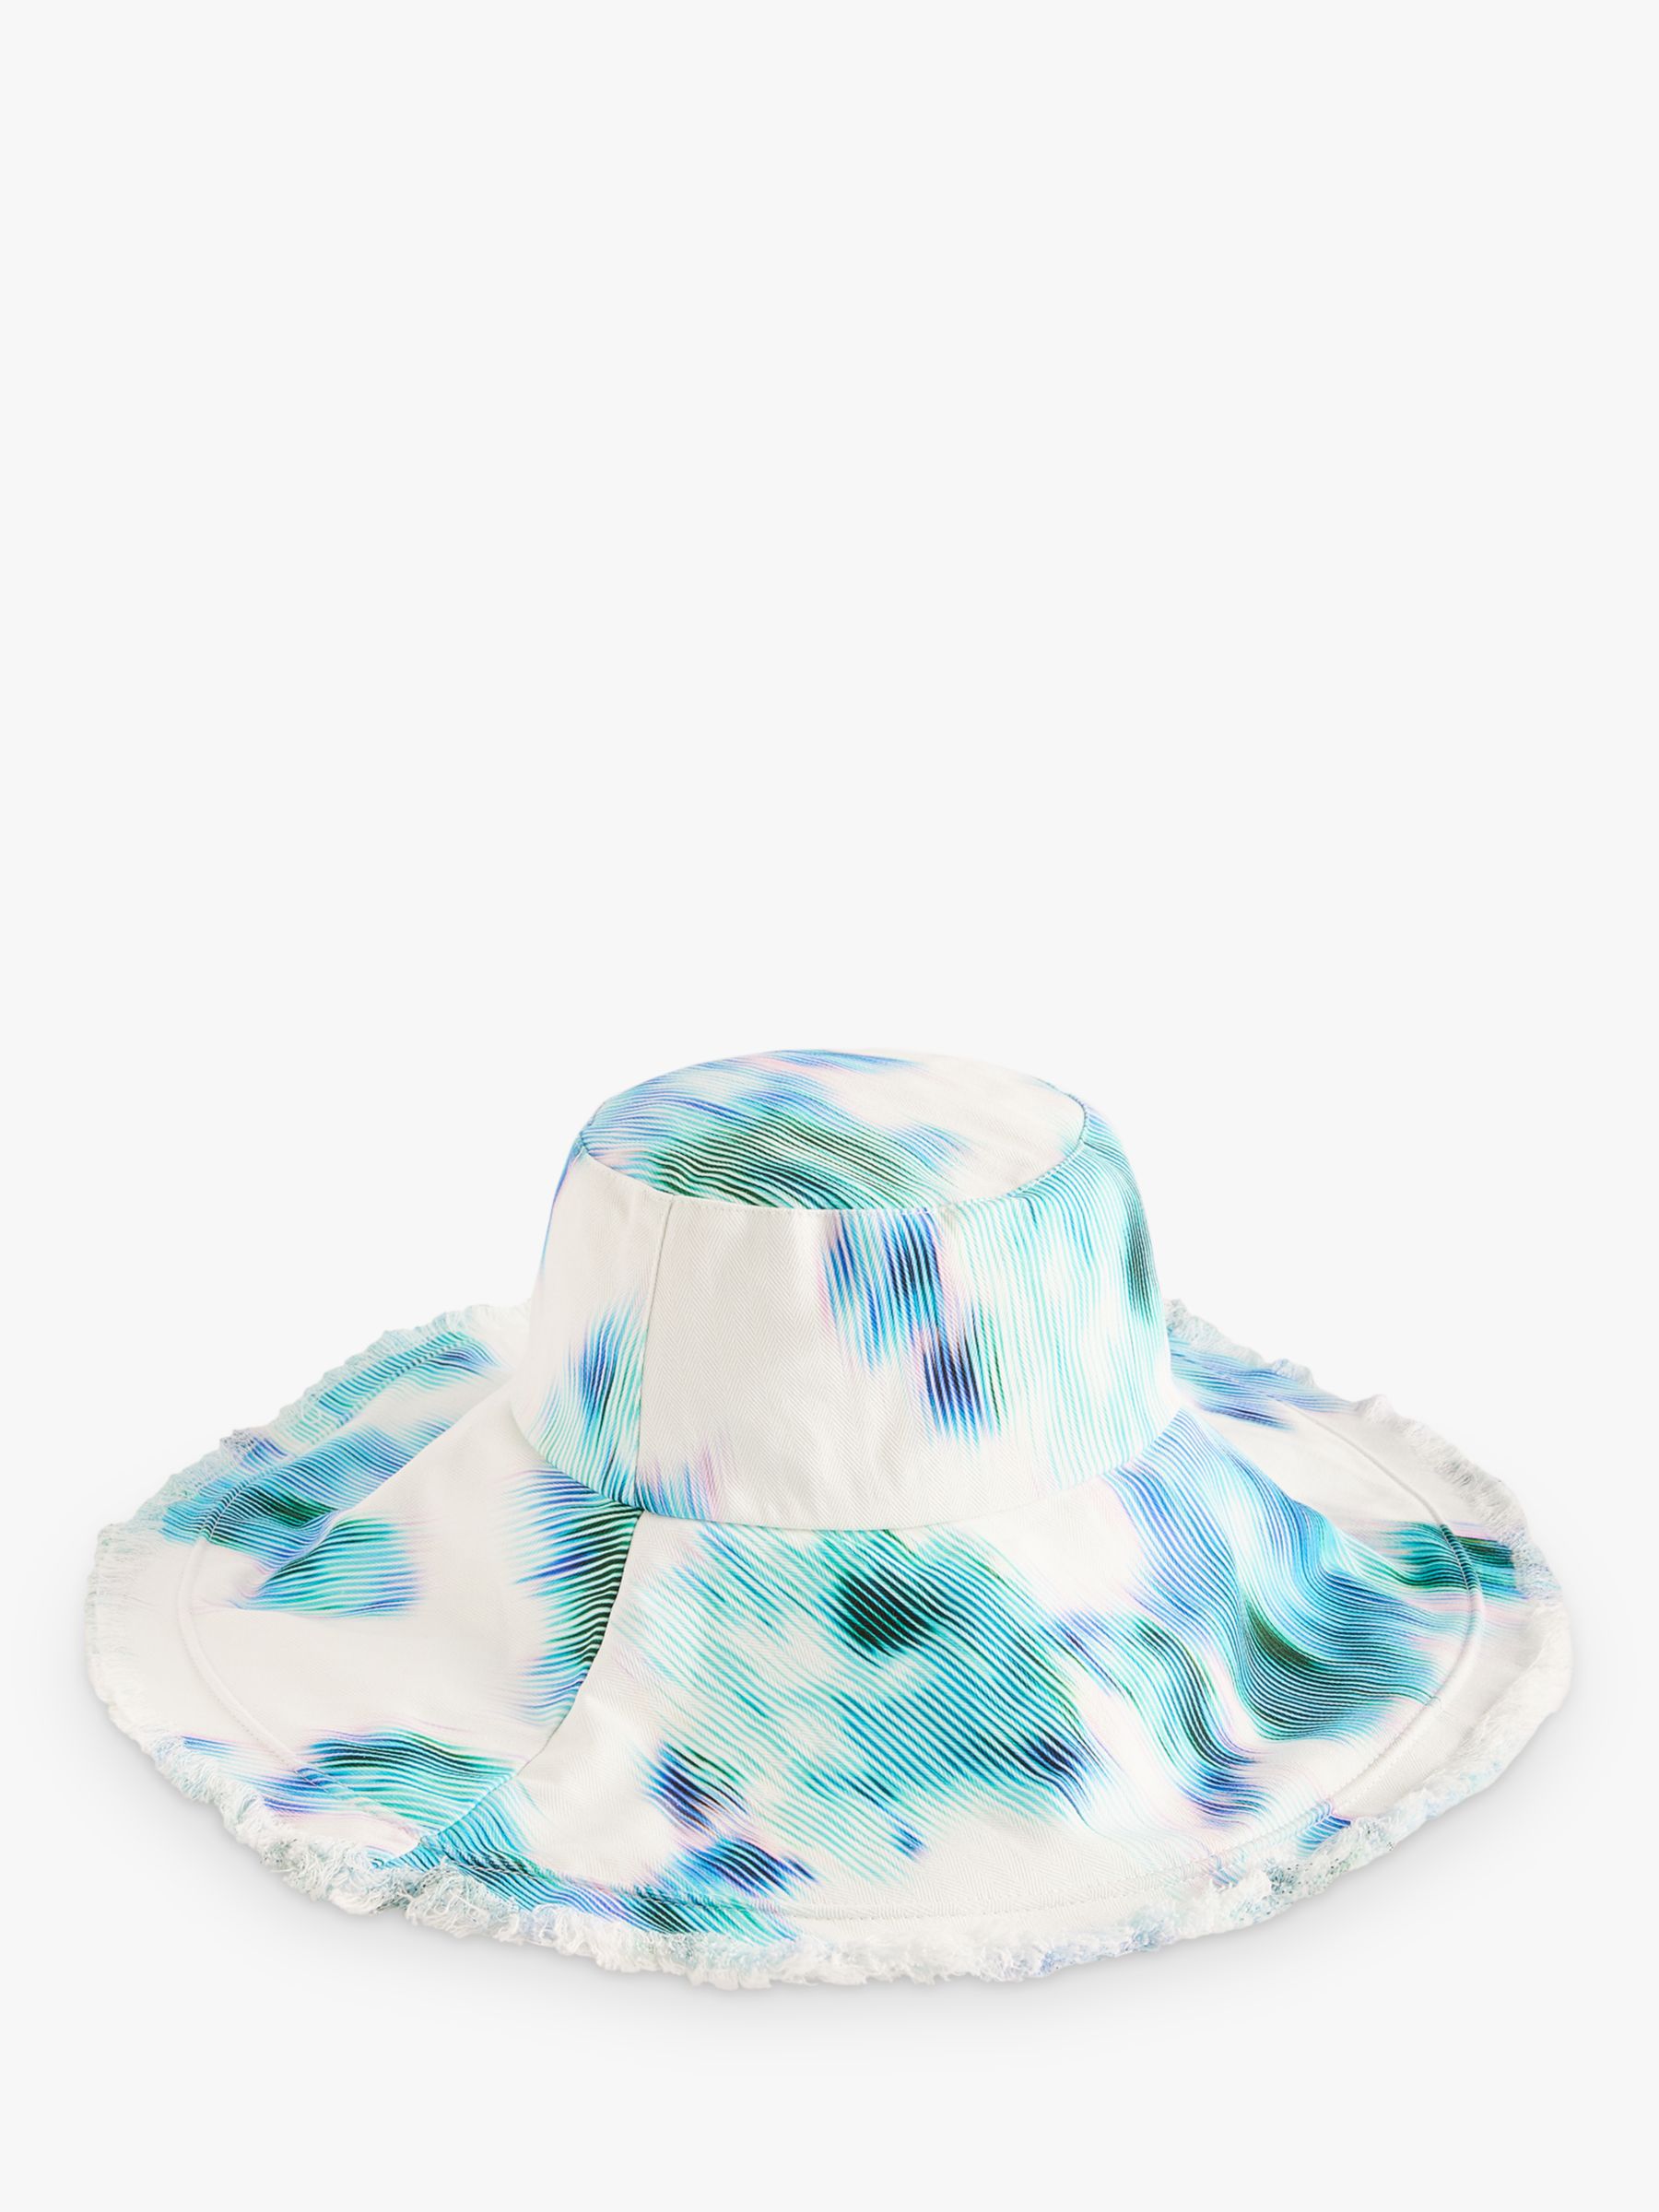 Ted Baker Fiionn Floral Printed Beach Hat, White/Multi, One Size